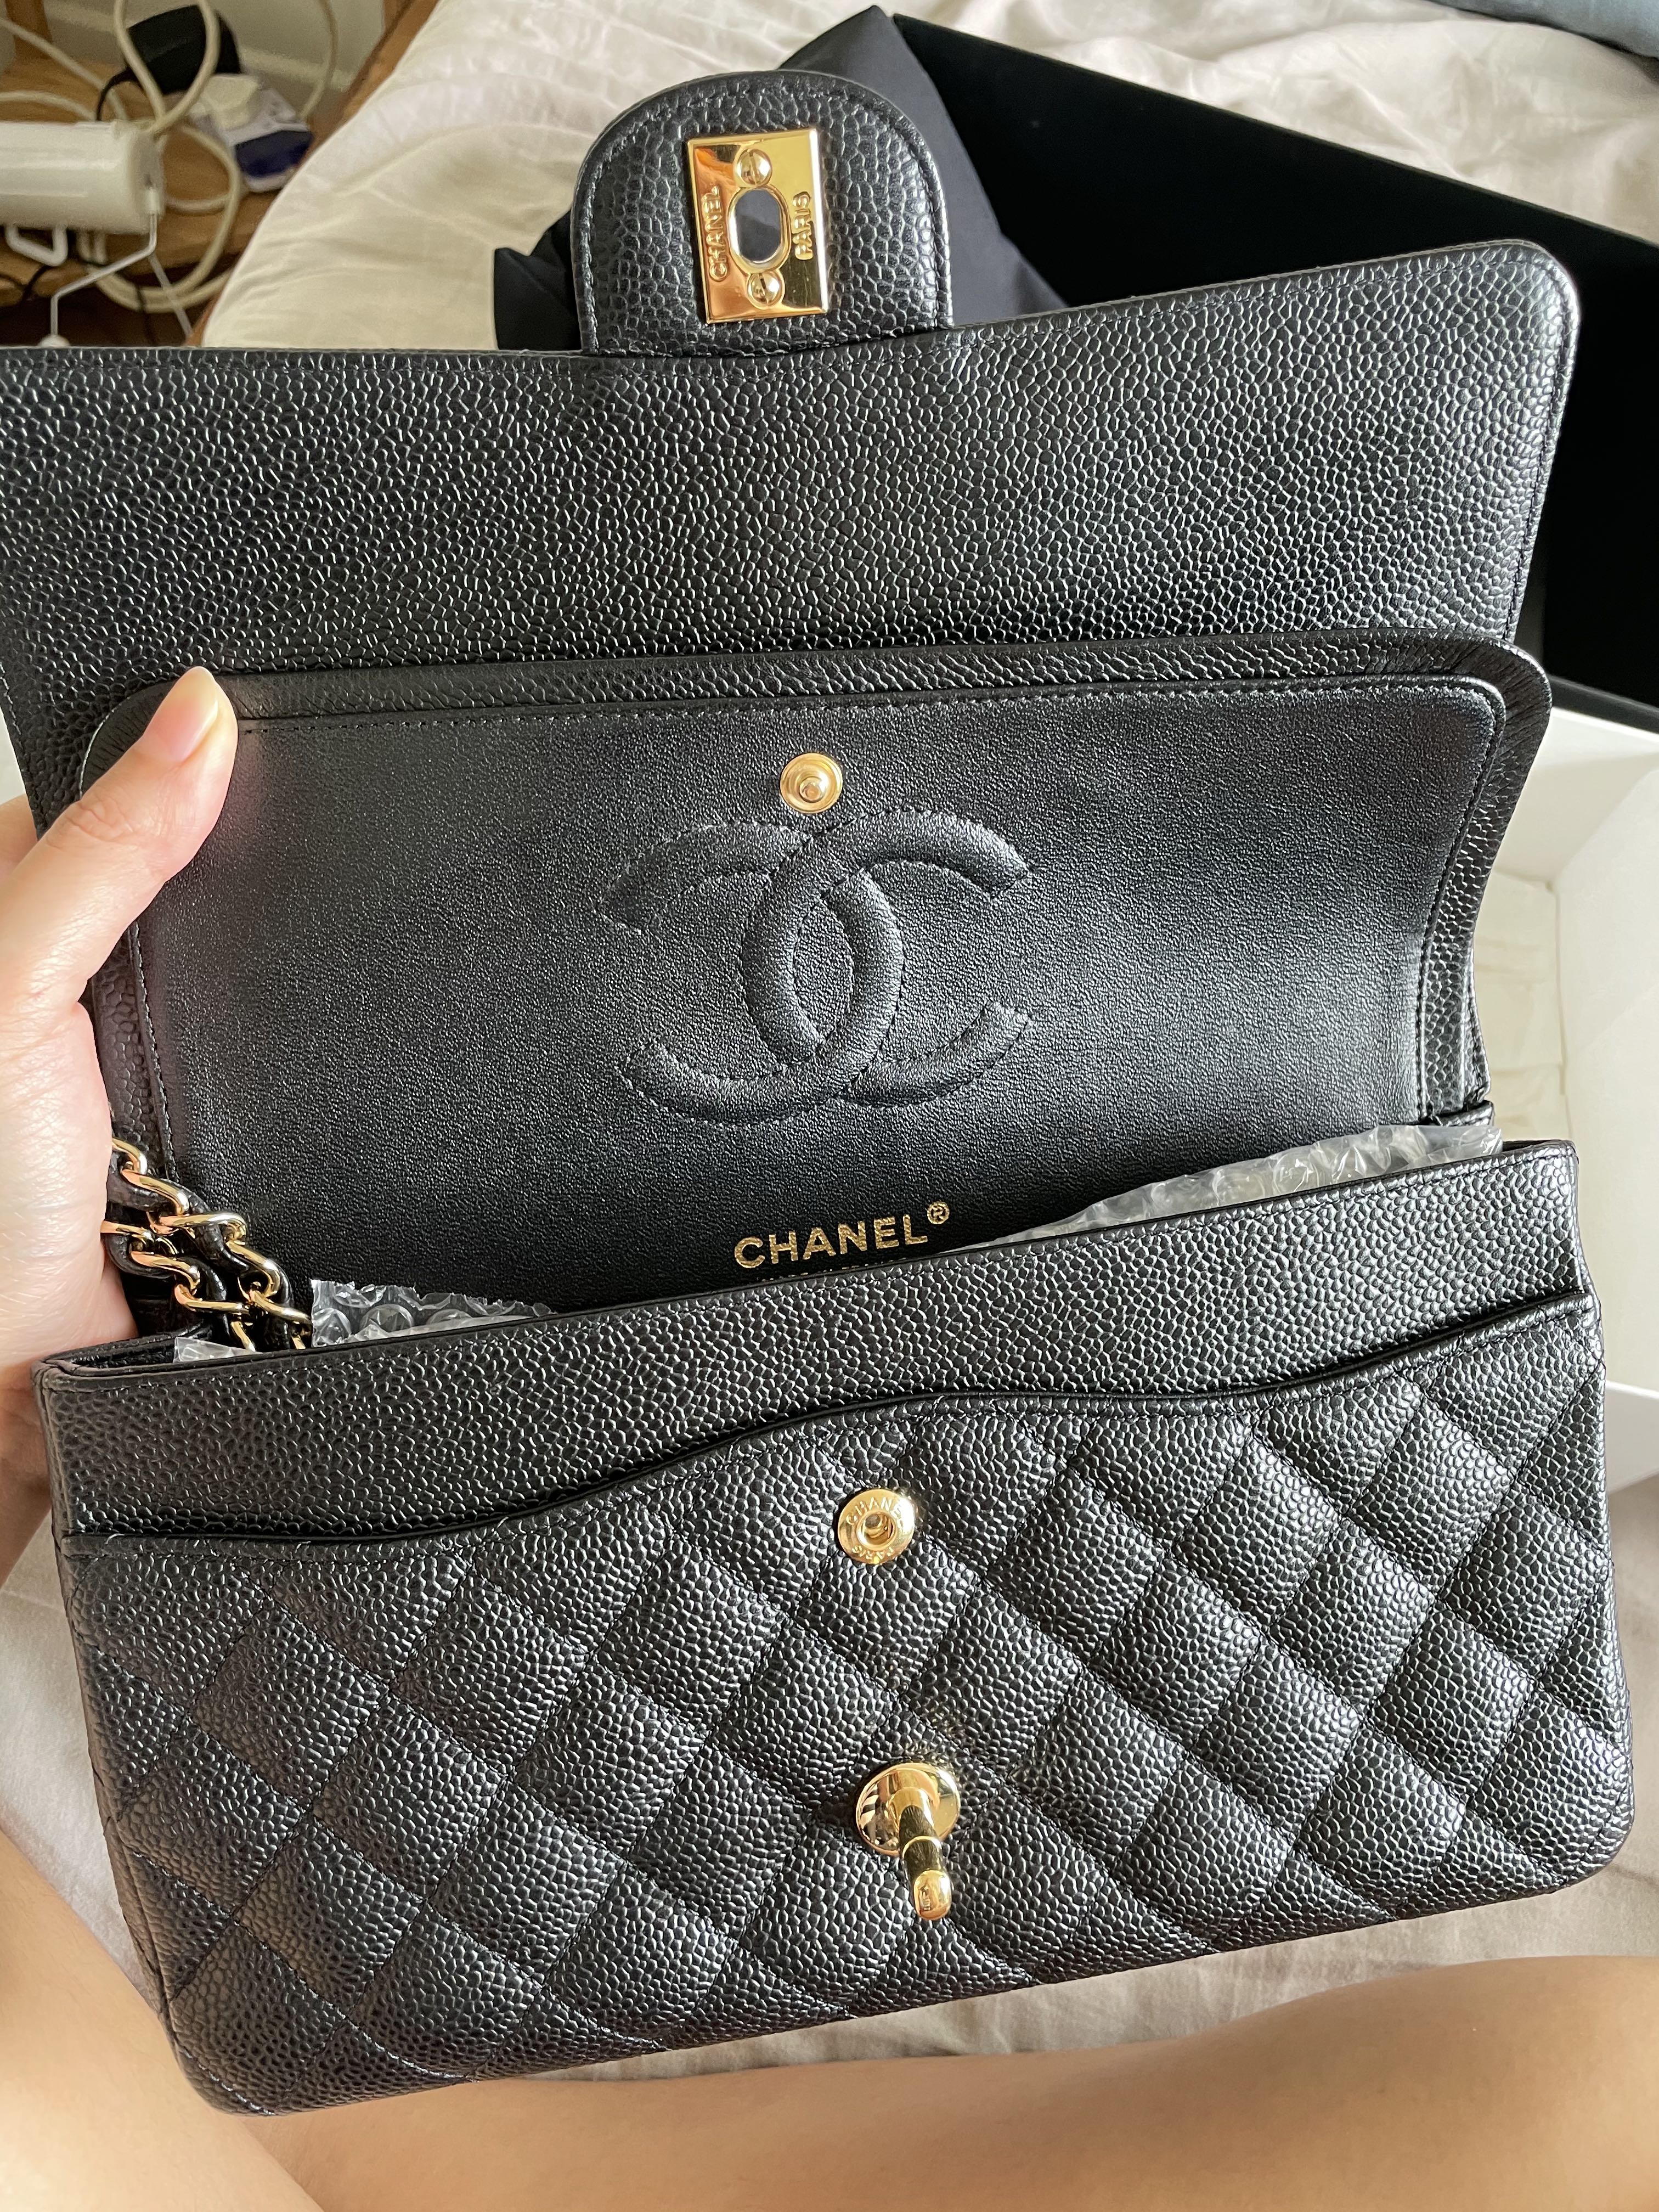 REAL vs FAKE CHANEL Medium Classic Flap SUPERFAKE Detail Comparison  My  First Luxury  YouTube